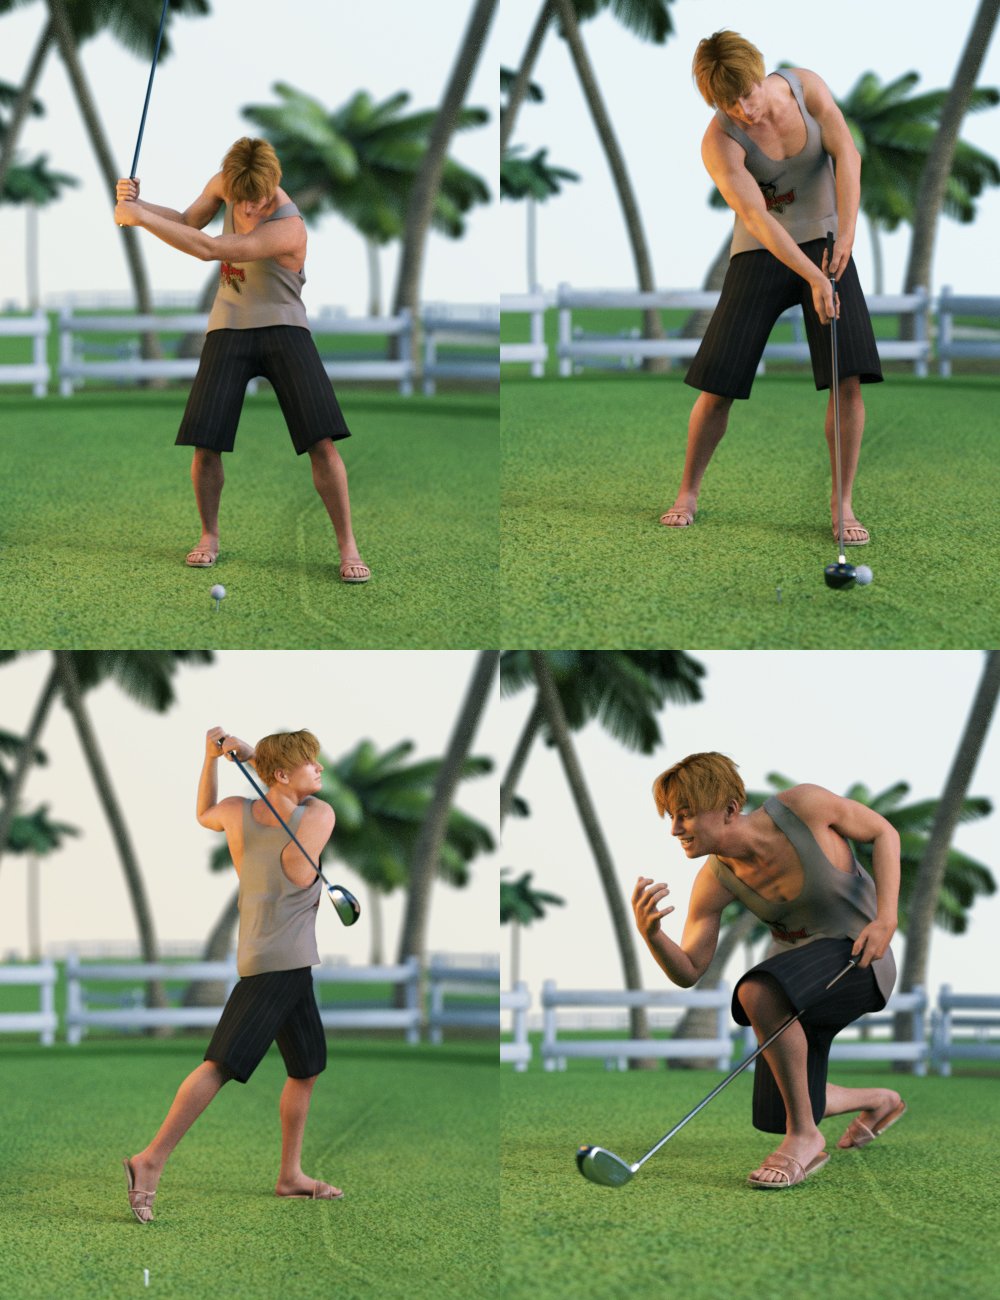 Sporting: Golf Poses for Genesis 3 by: FeralFey, 3D Models by Daz 3D